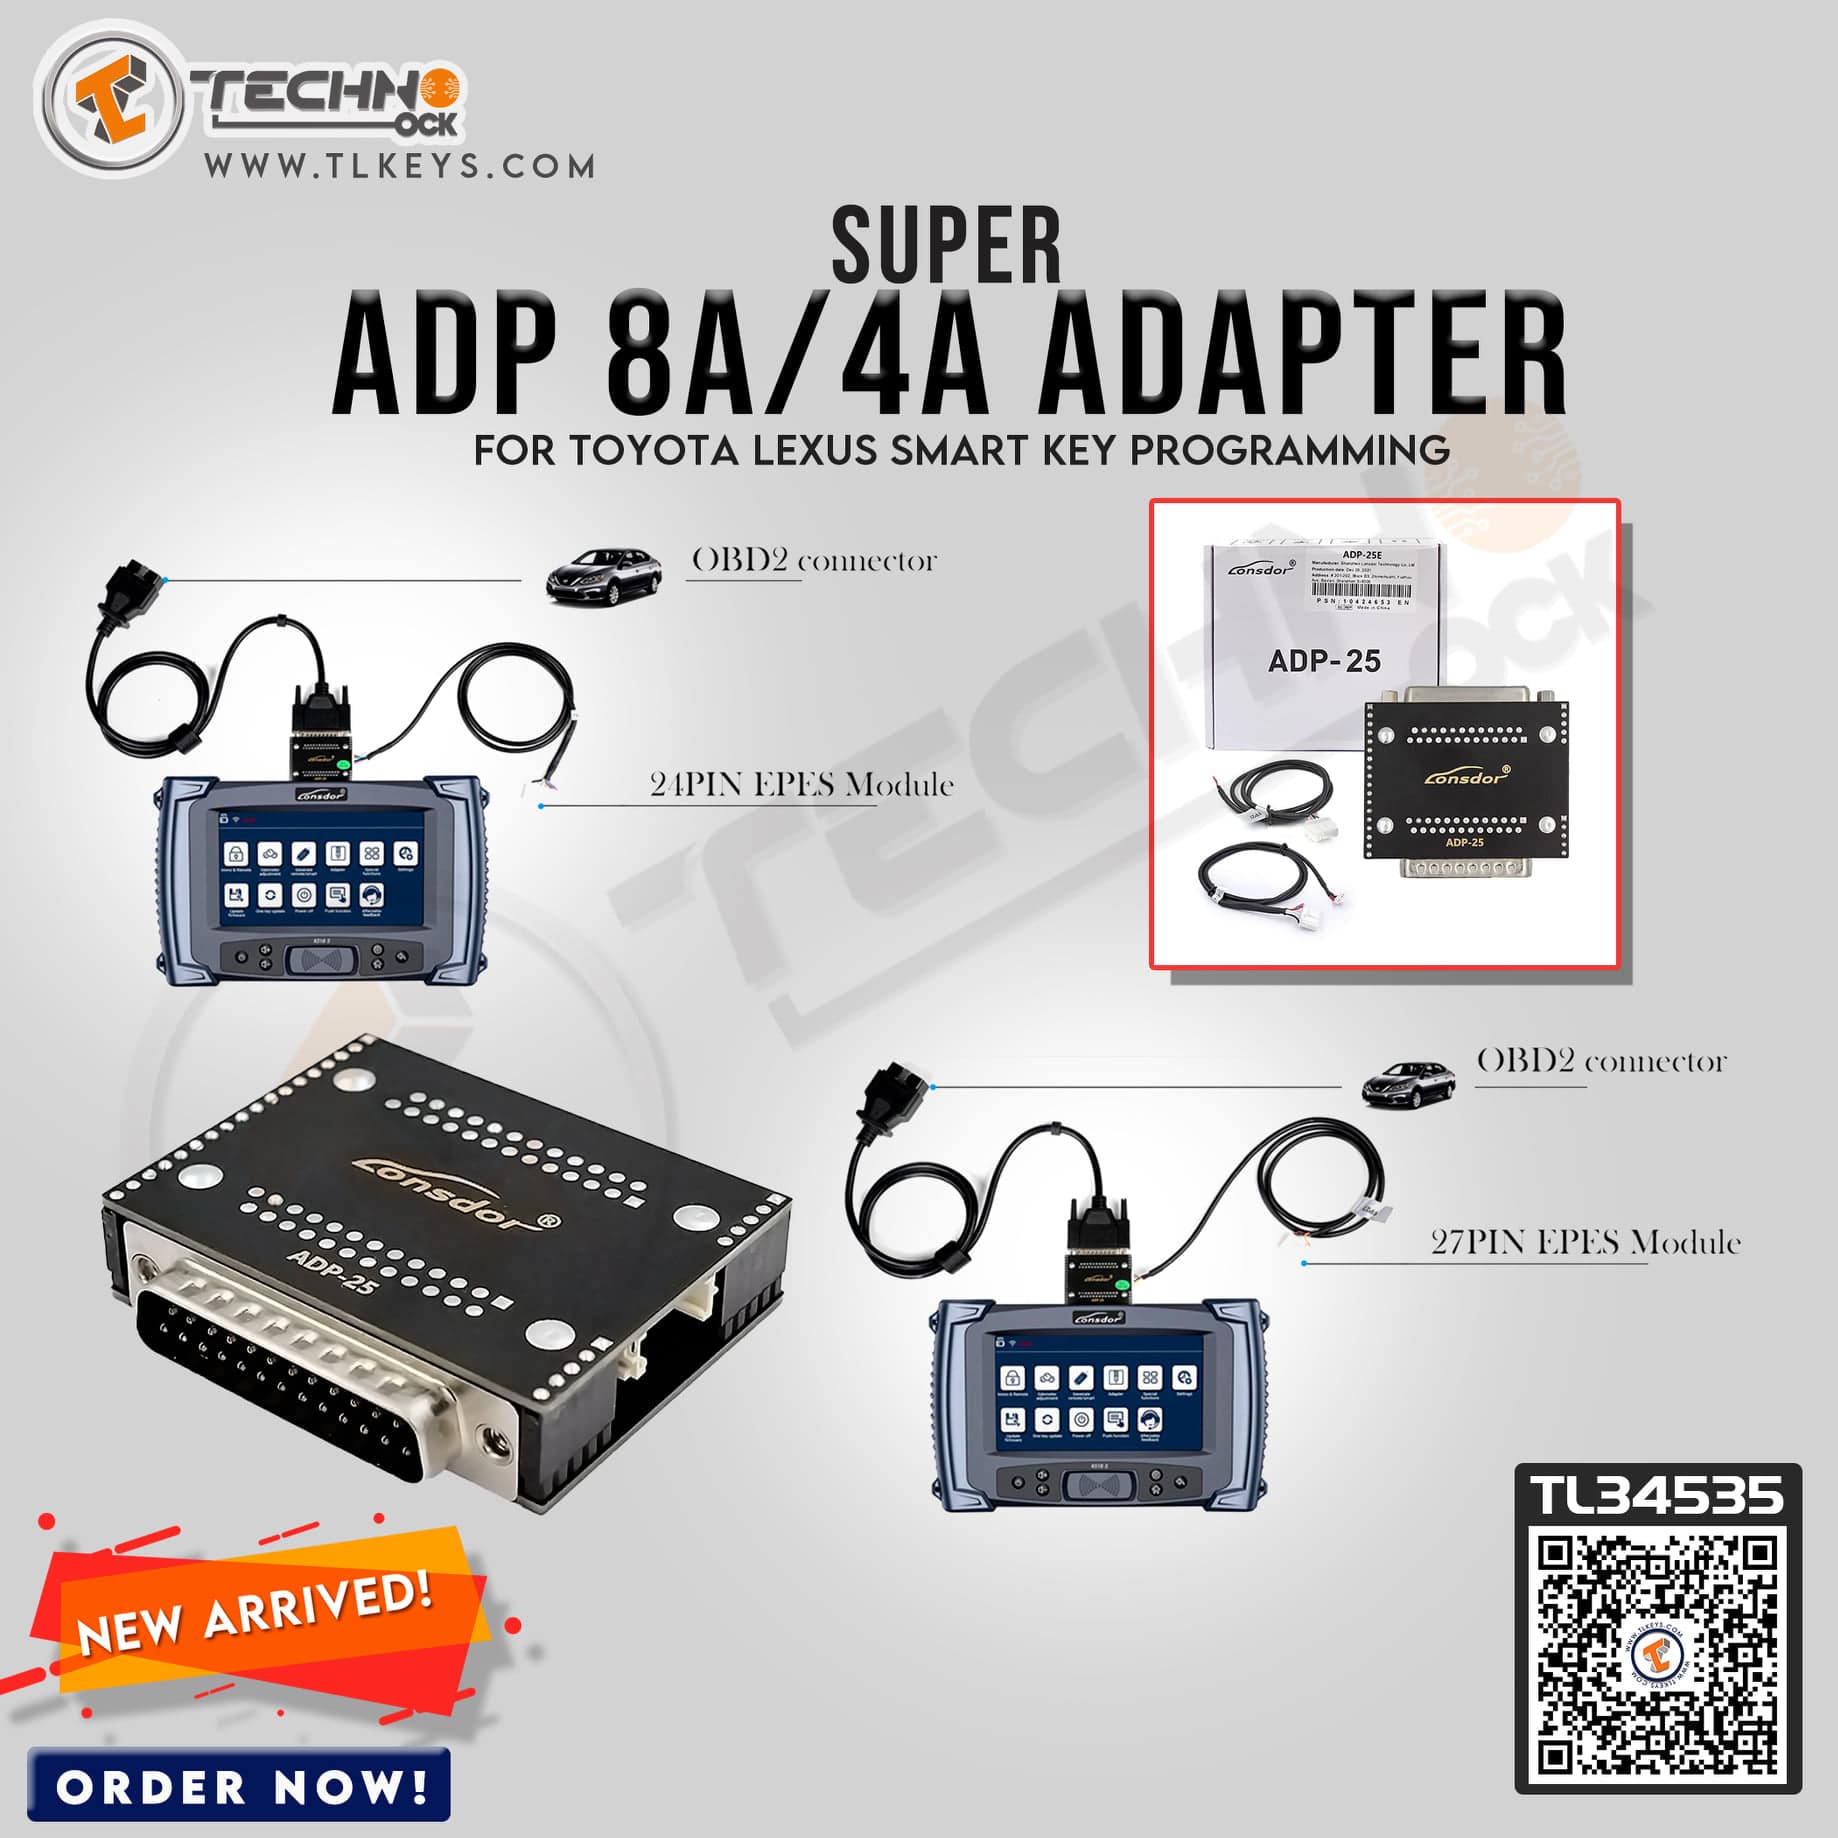 OBD2 connector 24PIN EPES Module